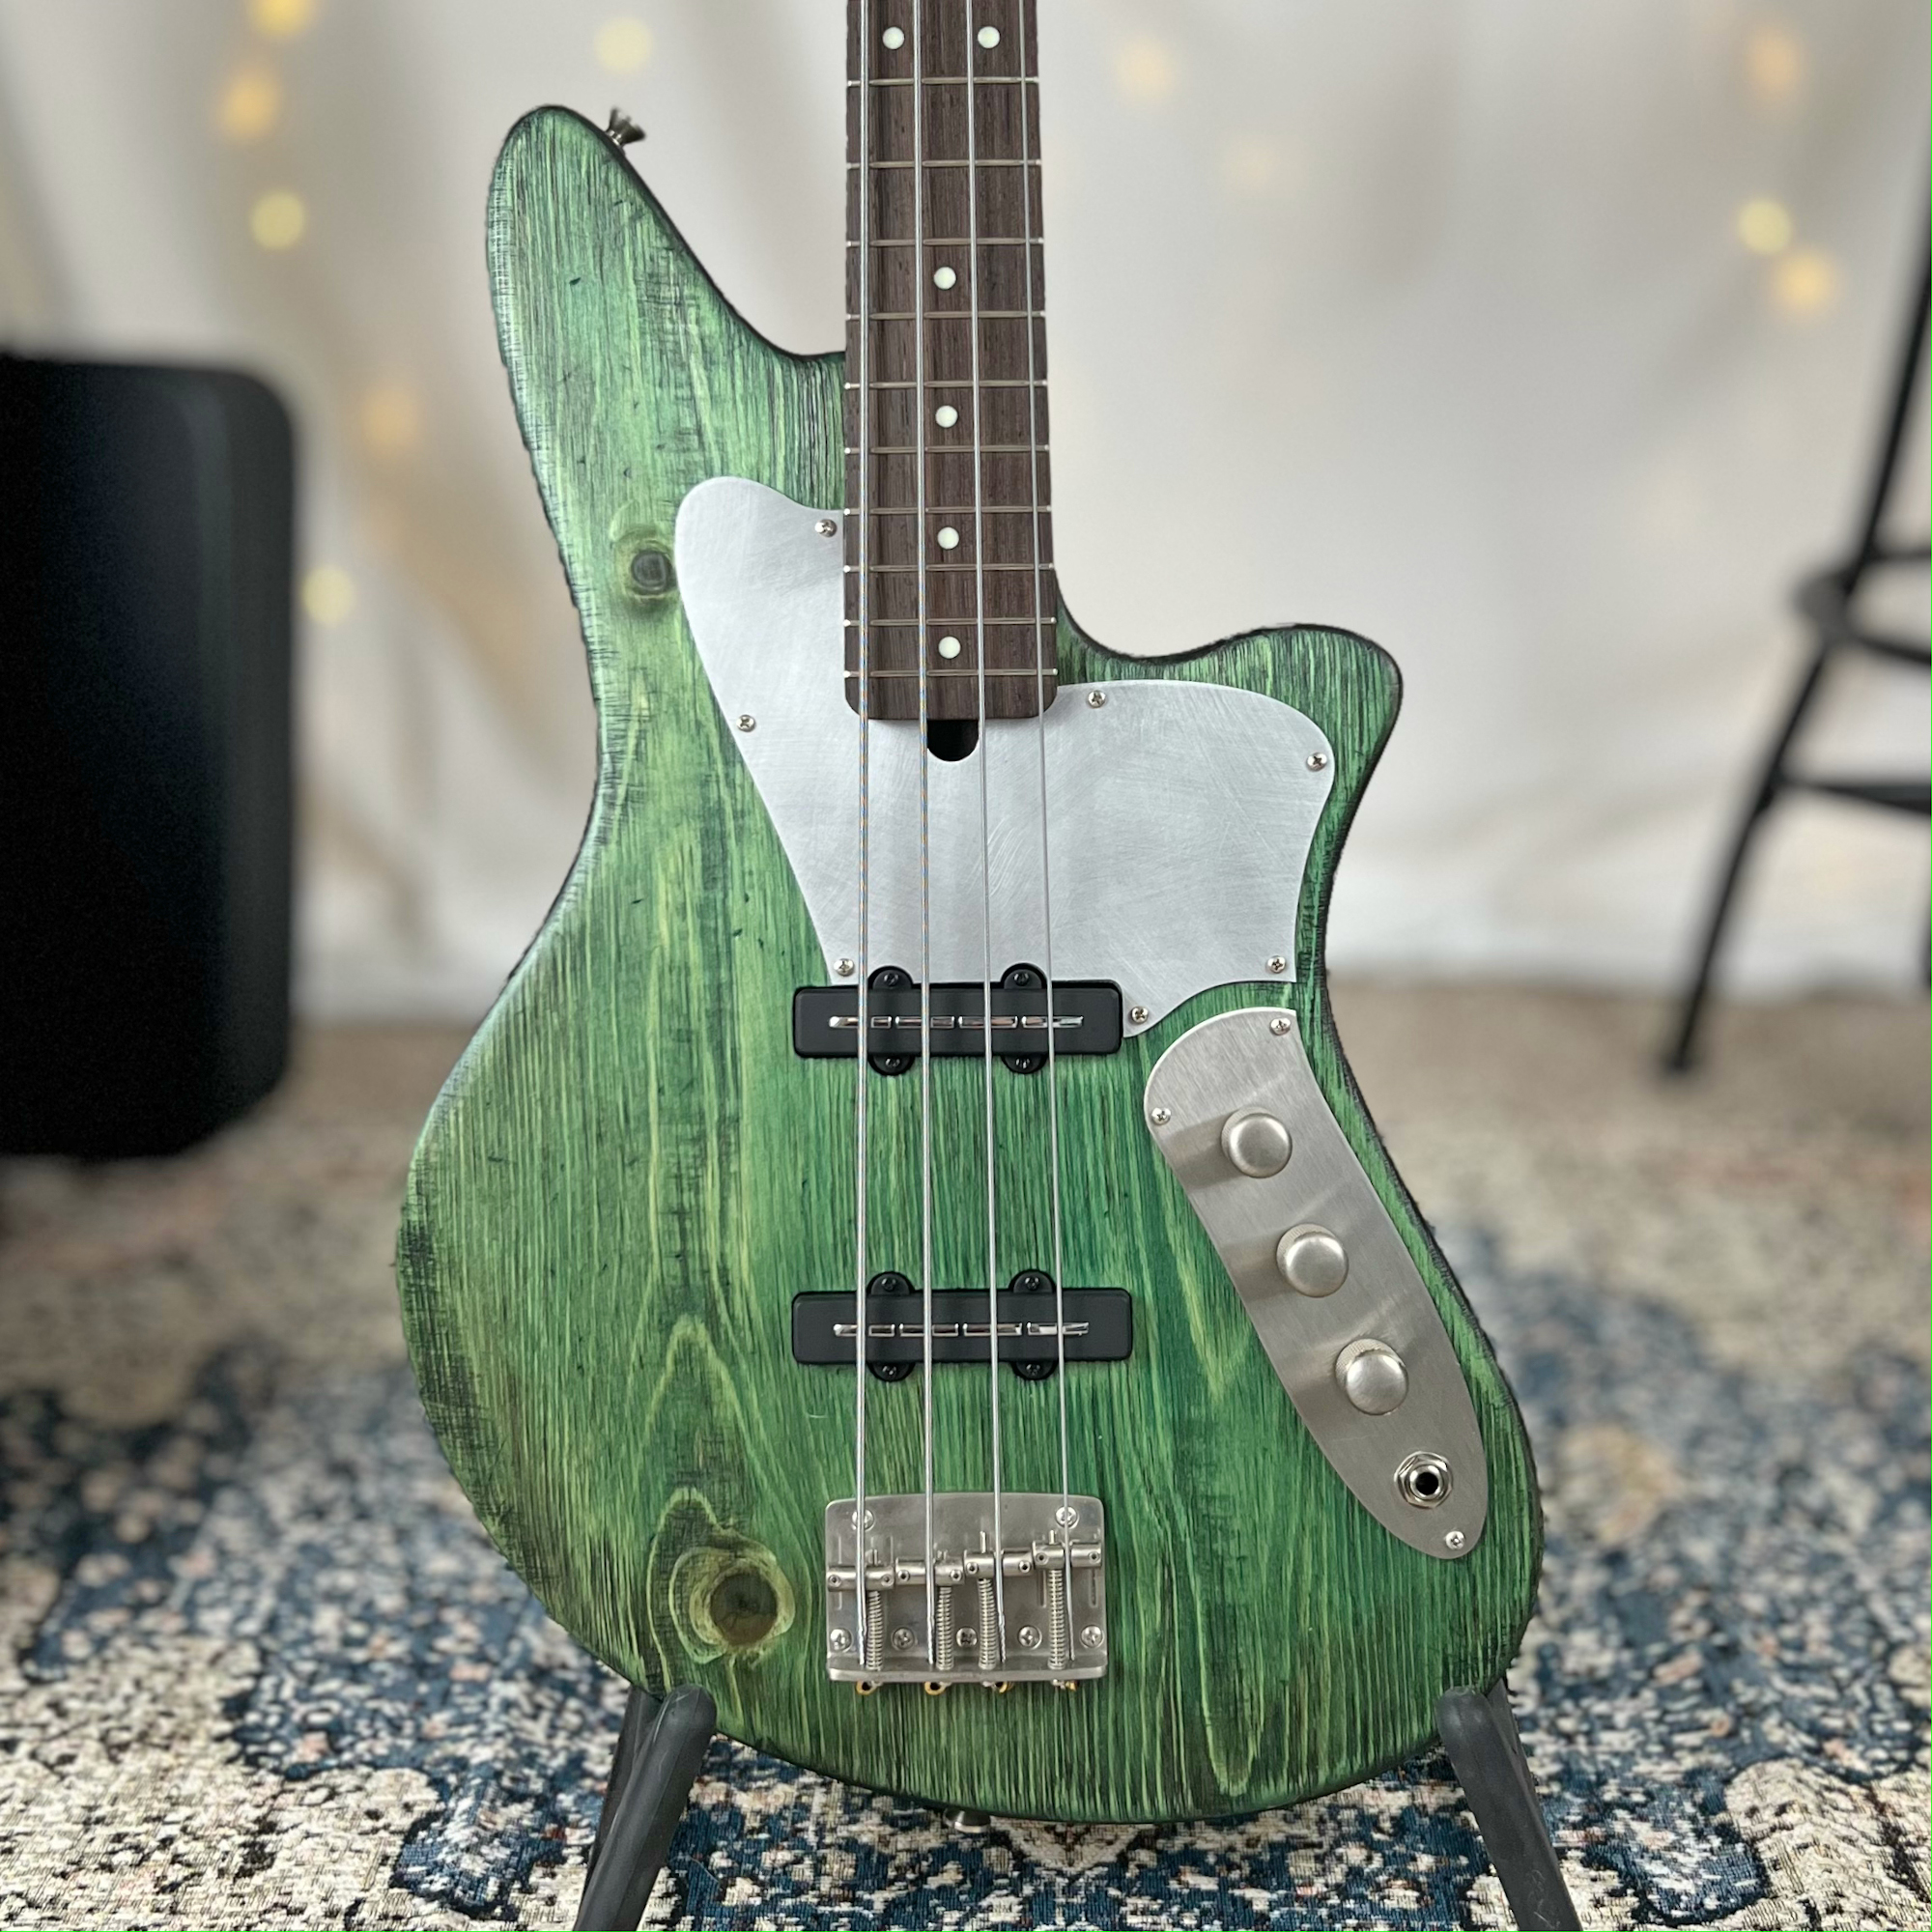 Jacqueline J2 32" Medium-Scale Bass in Jade Glow on Distressed Pine with Nordstrand J-Blade Pickup Set